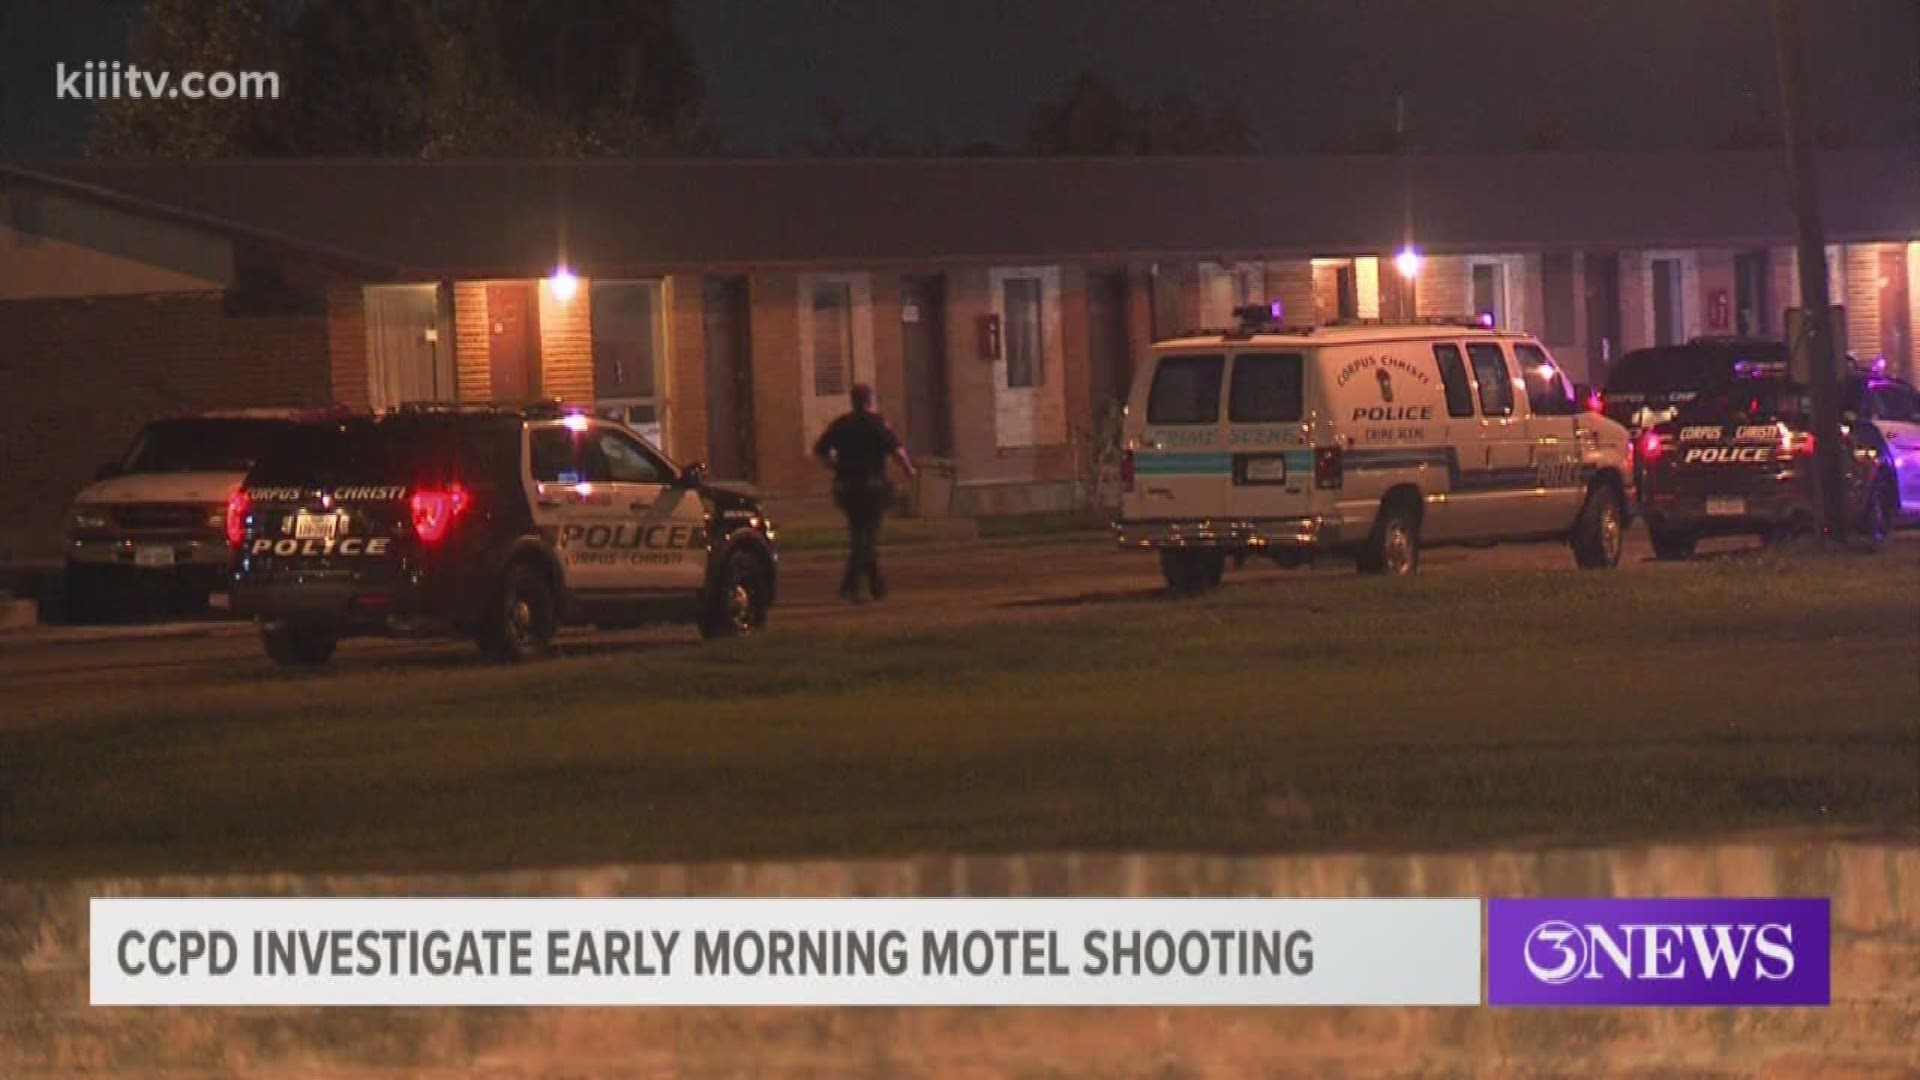 According to police, a 27-year-old man and female arrived at the Padre Motel and got into an argument with another man.